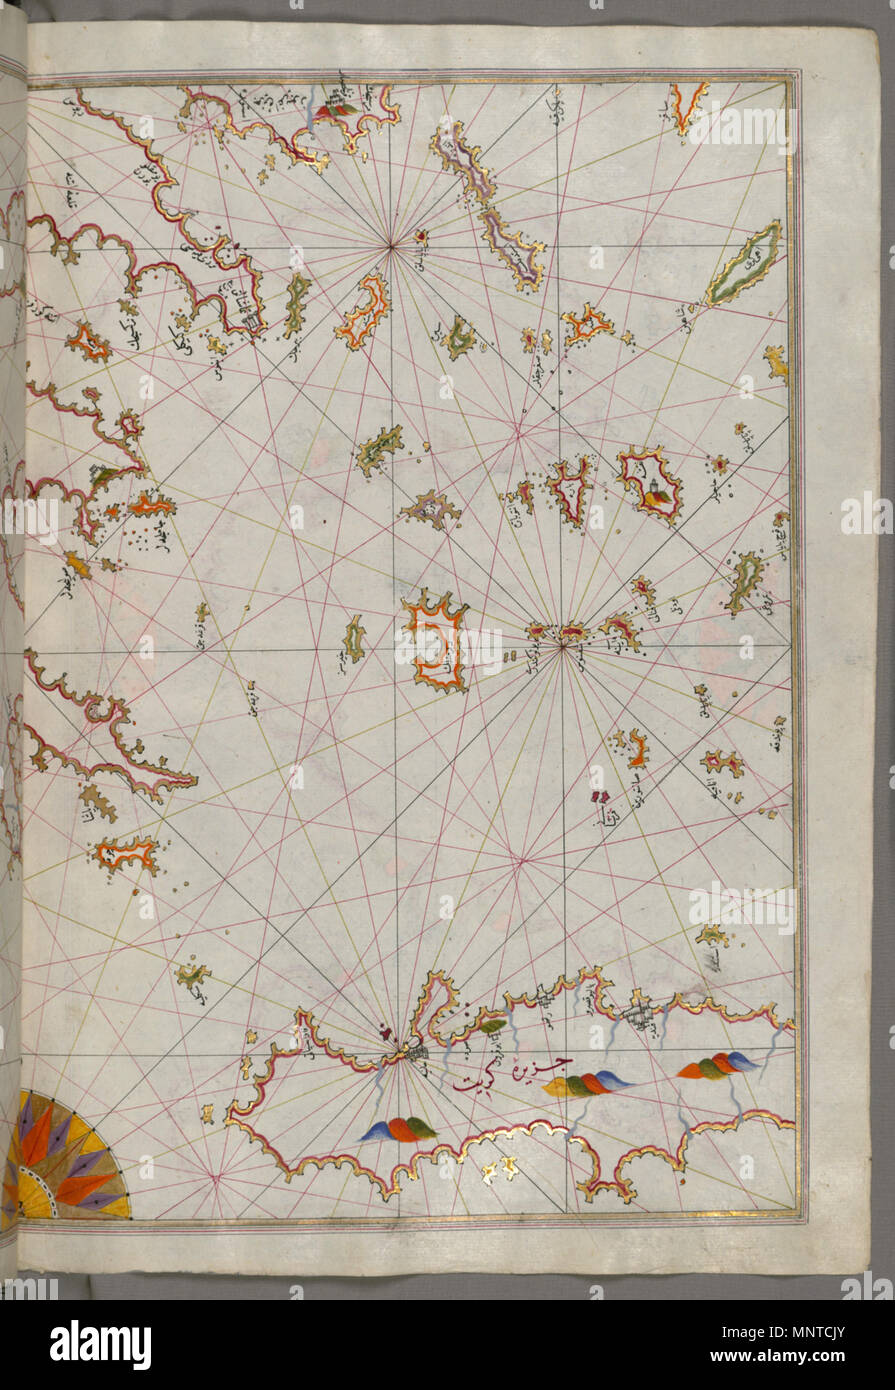 Piri Reis (Turkish, 1465-1555). 'Leaf from Book on Navigation,' 17th-18th century. ink, paint, and gold on paper. Walters Art Museum (W.658.129B): Acquired by Henry Walters. W.658.129b 1003 Piri Reis - Map of the Cyclades Islands Between the Peloponnese Peninsula and Crete - Walters W658129B - Full Page Stock Photo